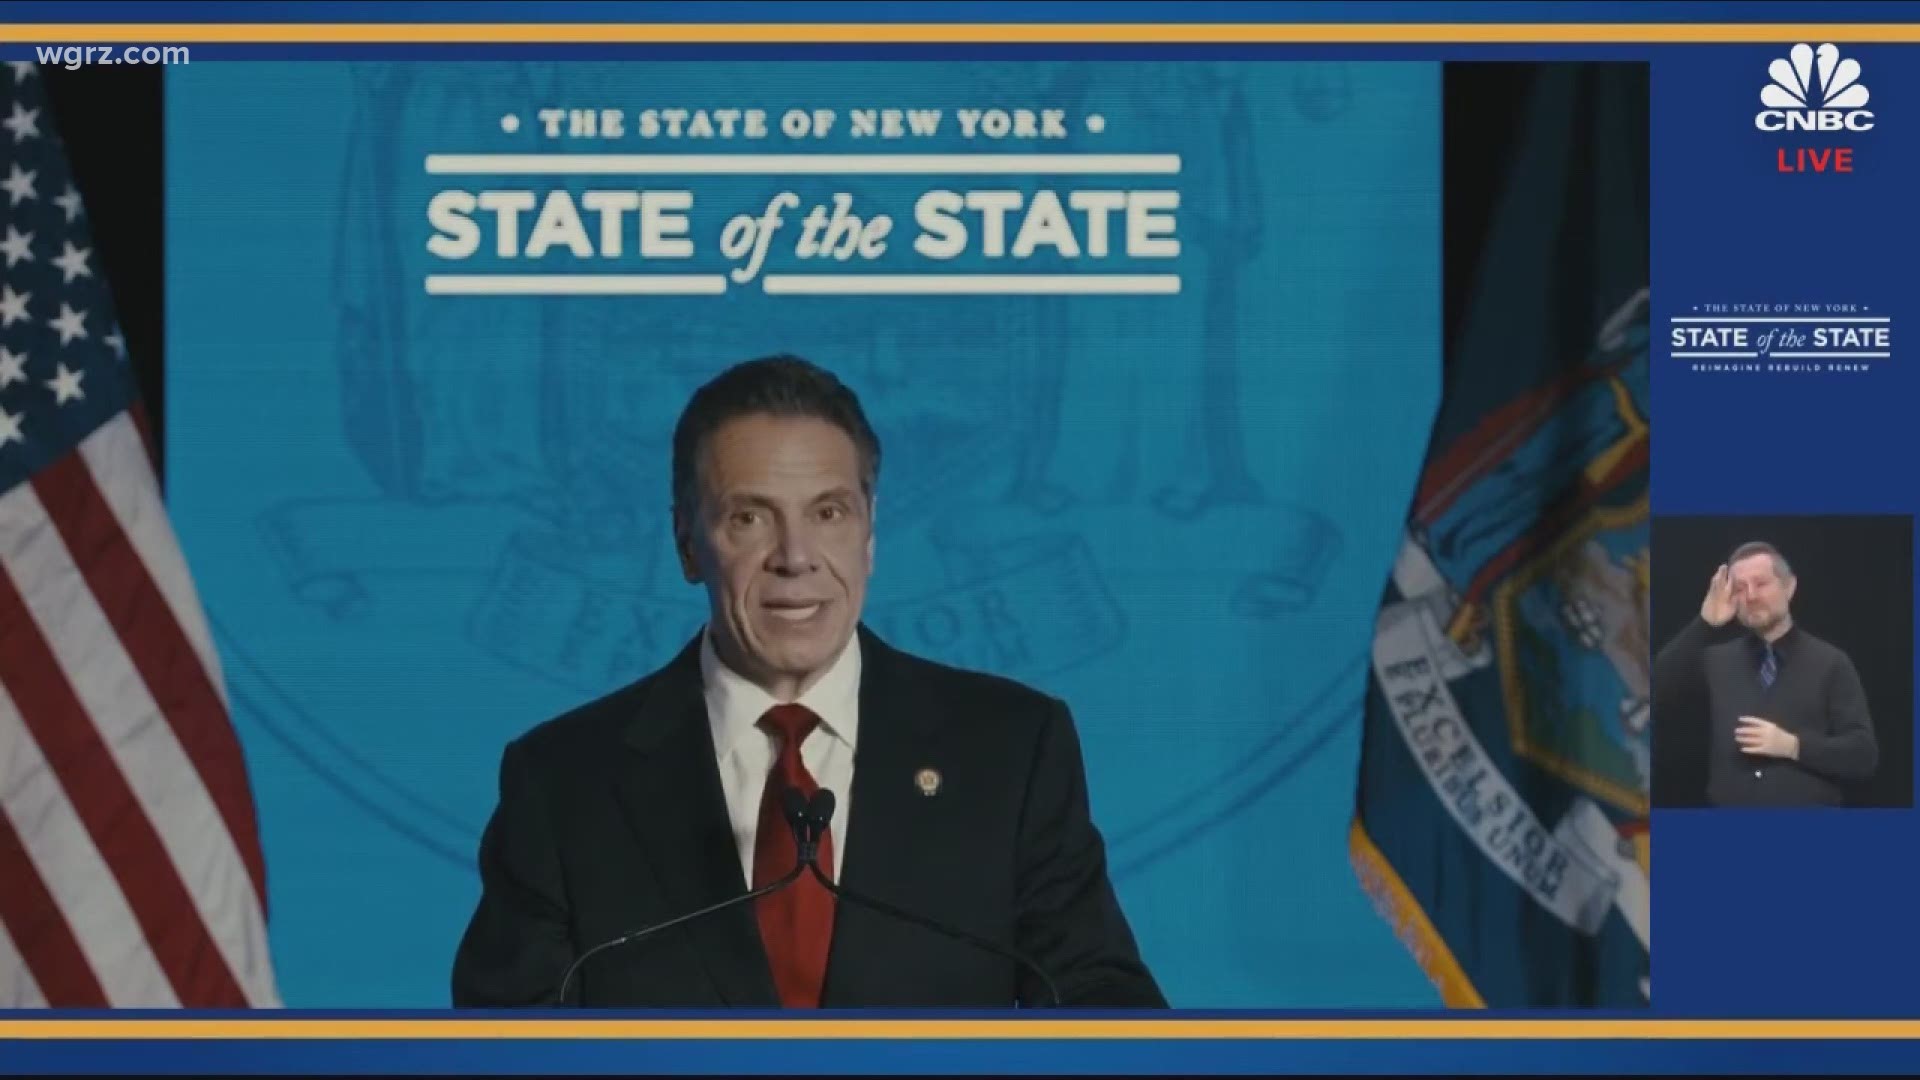 Cuomo delivered an overview of his plans for the year ahead, with more to come with specific topics in the coming days.